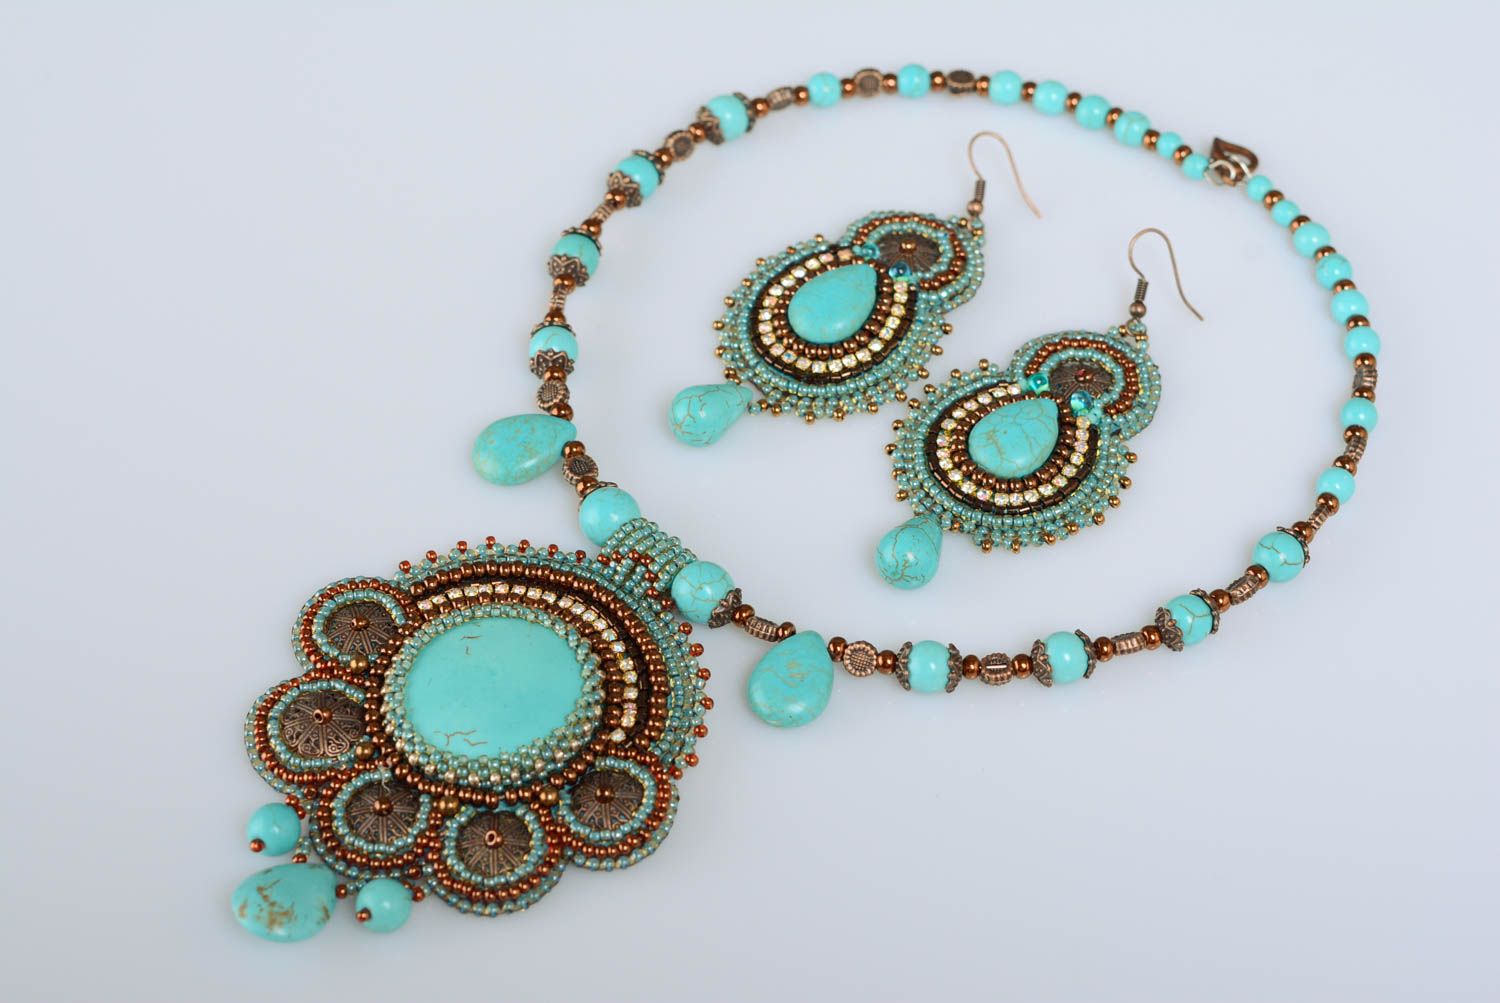 Set of blue and brown bead embroidered jewelry 2 items necklace and earrings photo 1